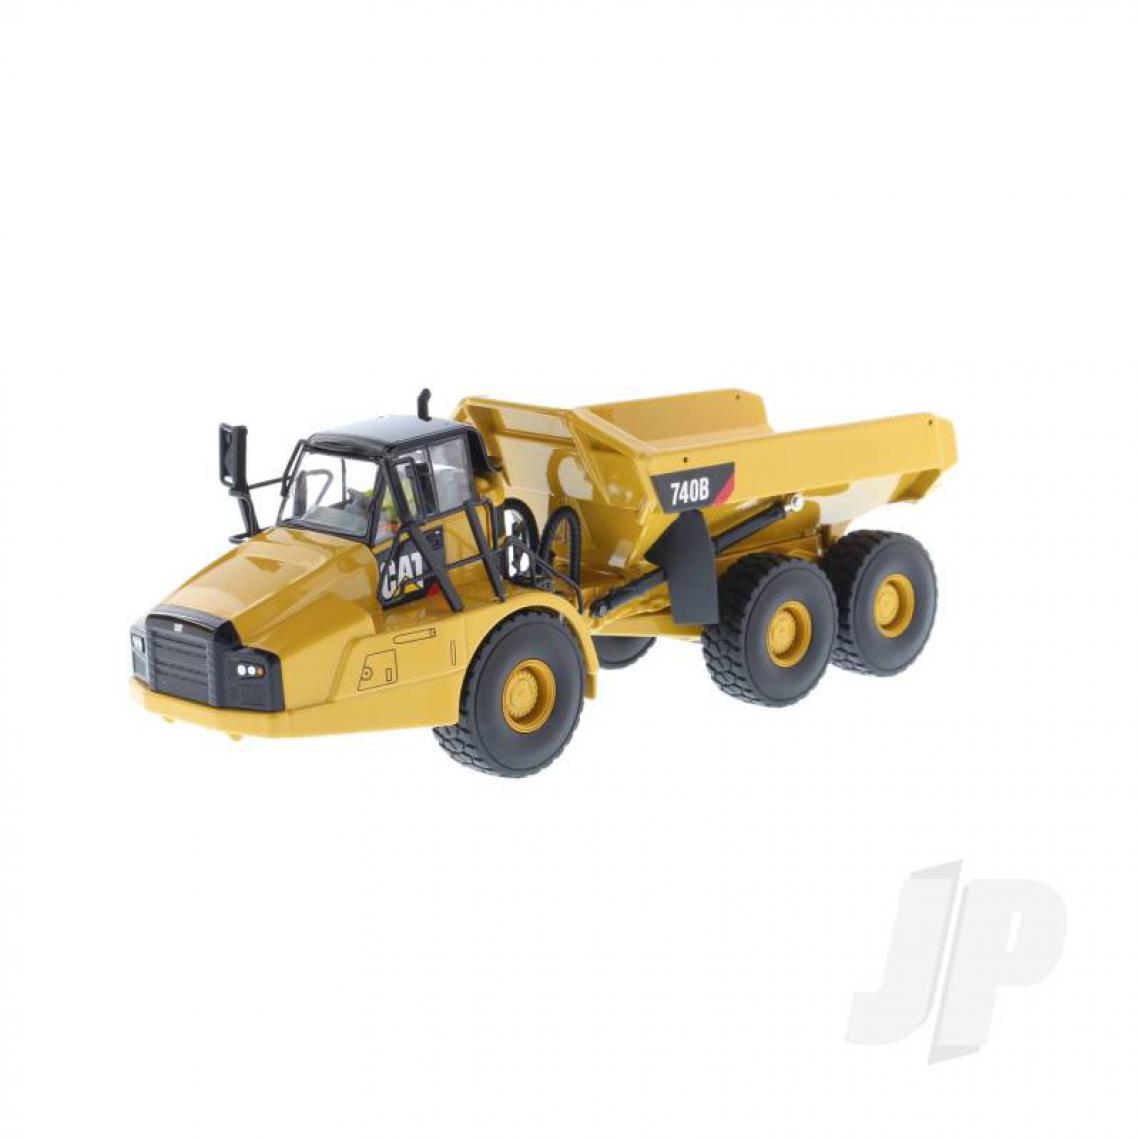 Diecast Masters - 1:50 Cat 740B Articulated Truck (Tipper Body) - Voitures